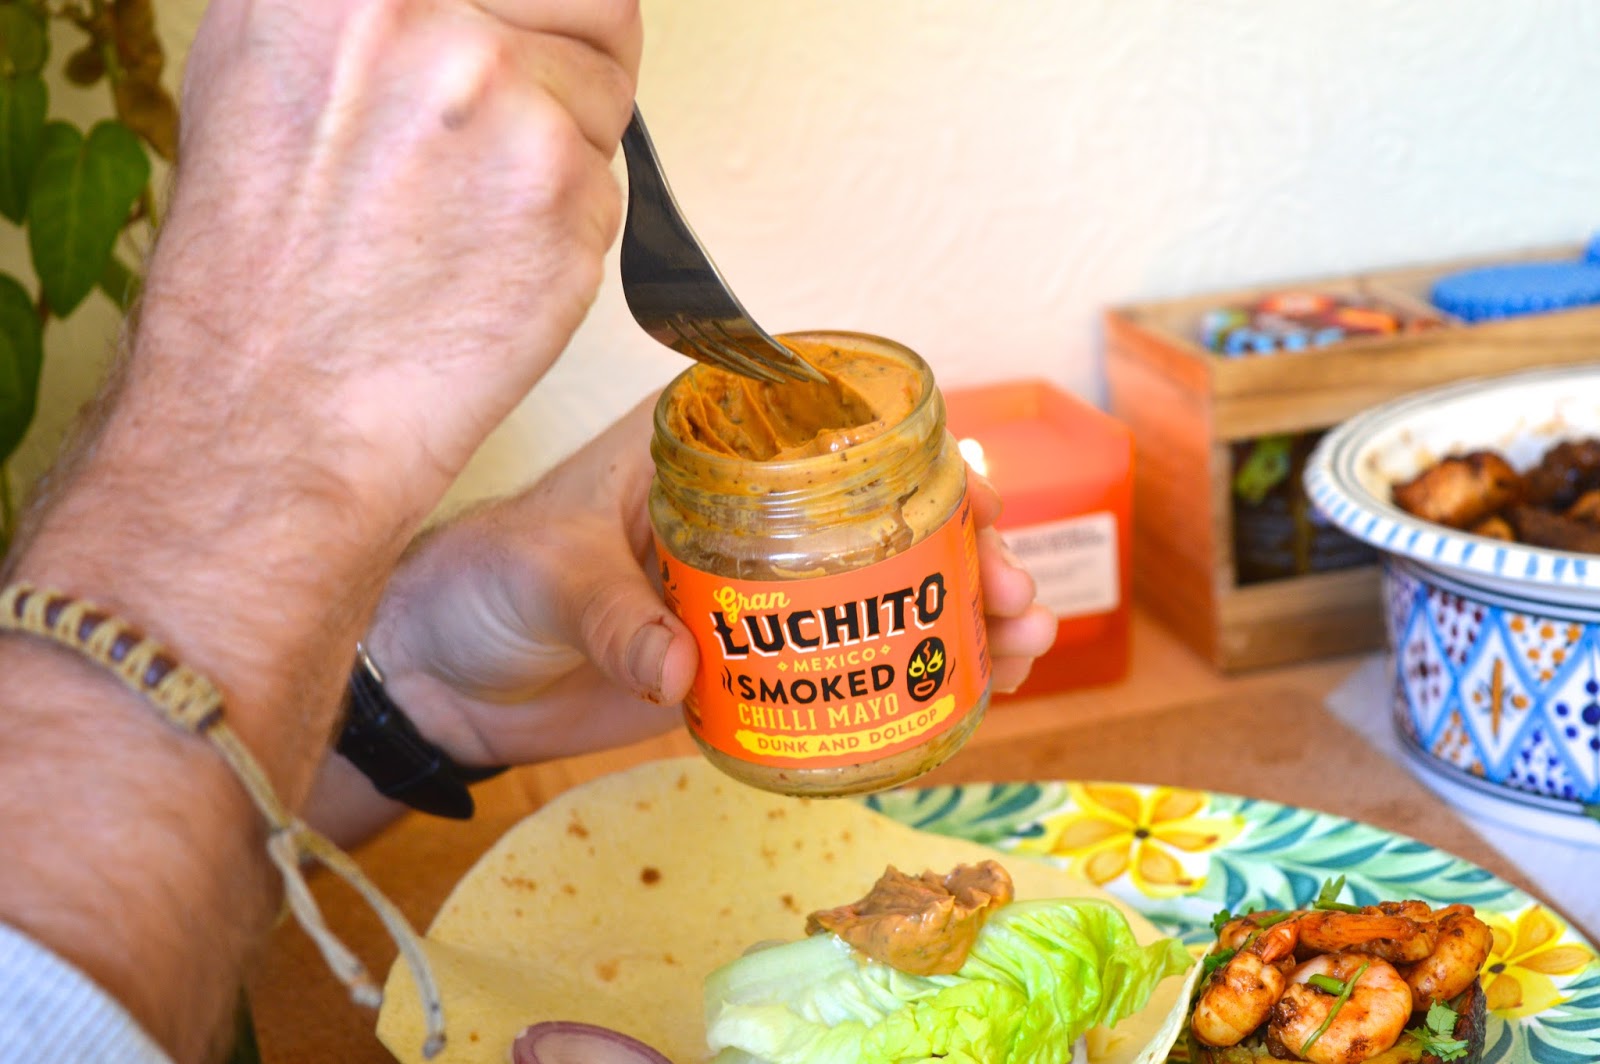 Mexican food recipes, Gran Luchito sauces, food bloggers, UK food blog, lifestyle bloggers, UK lifestyle blog